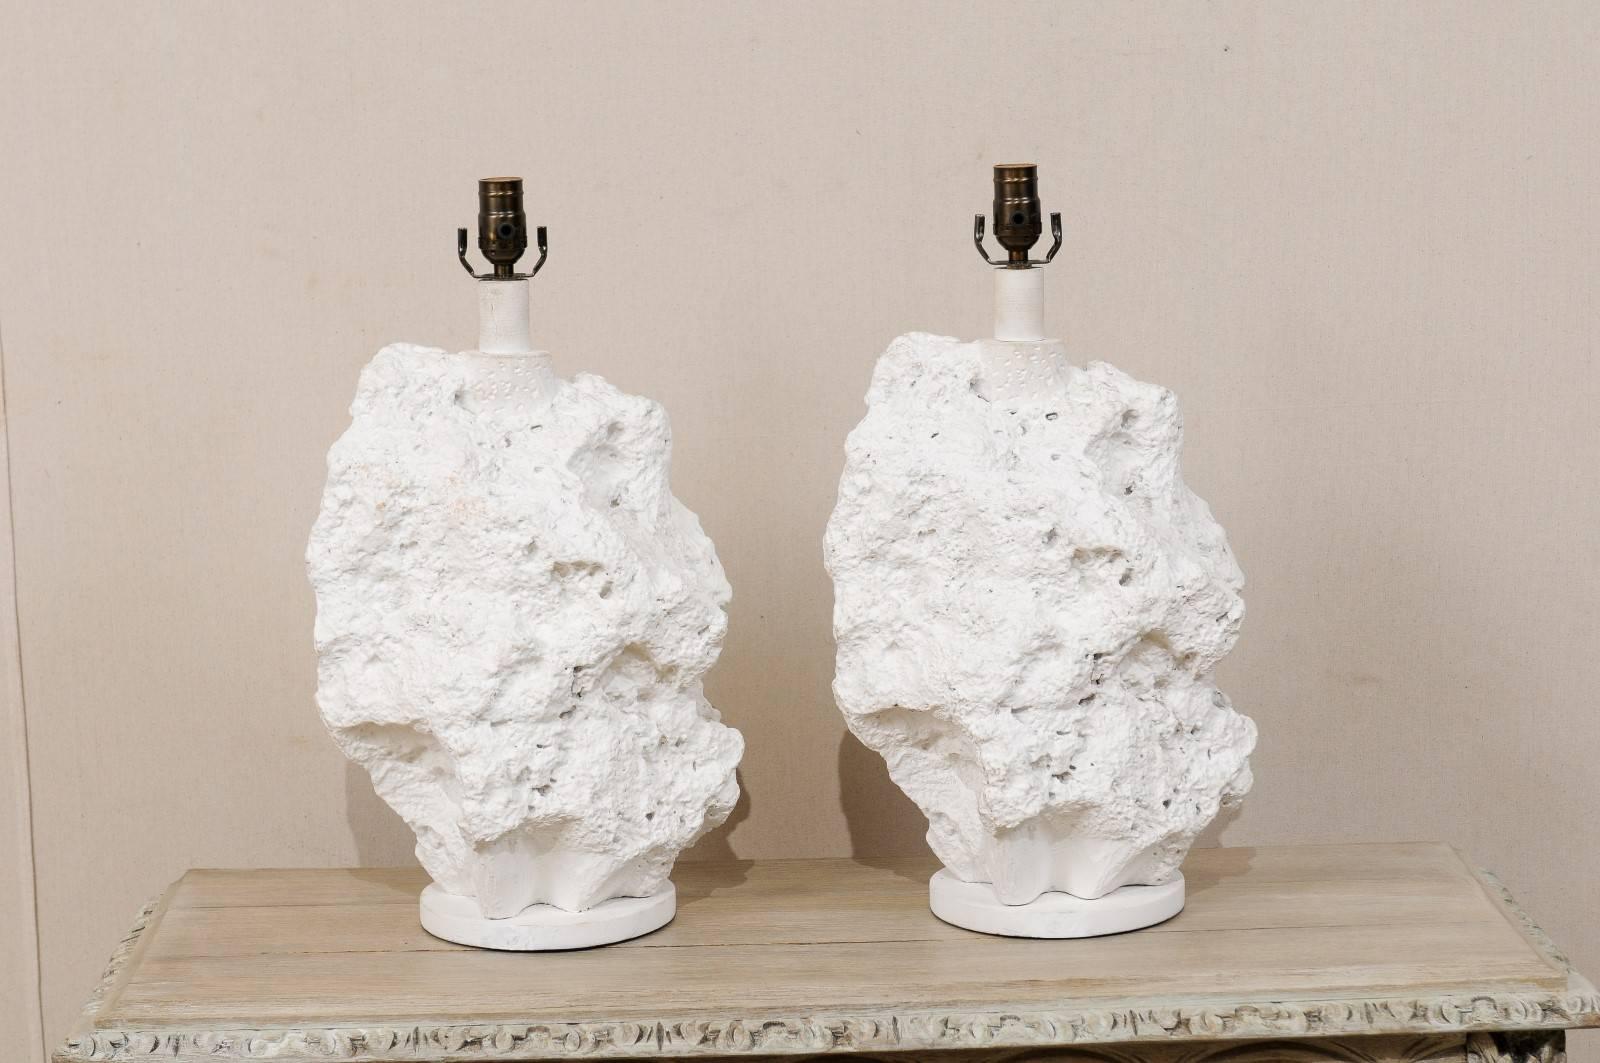 A pair of modern vintage American table lamps attributed to Sirmos. This pair of American table lamps feature a modern, rock like design. The lamp bodies are made of plaster, rest on a round wood base and are white in color. The height of the lamps